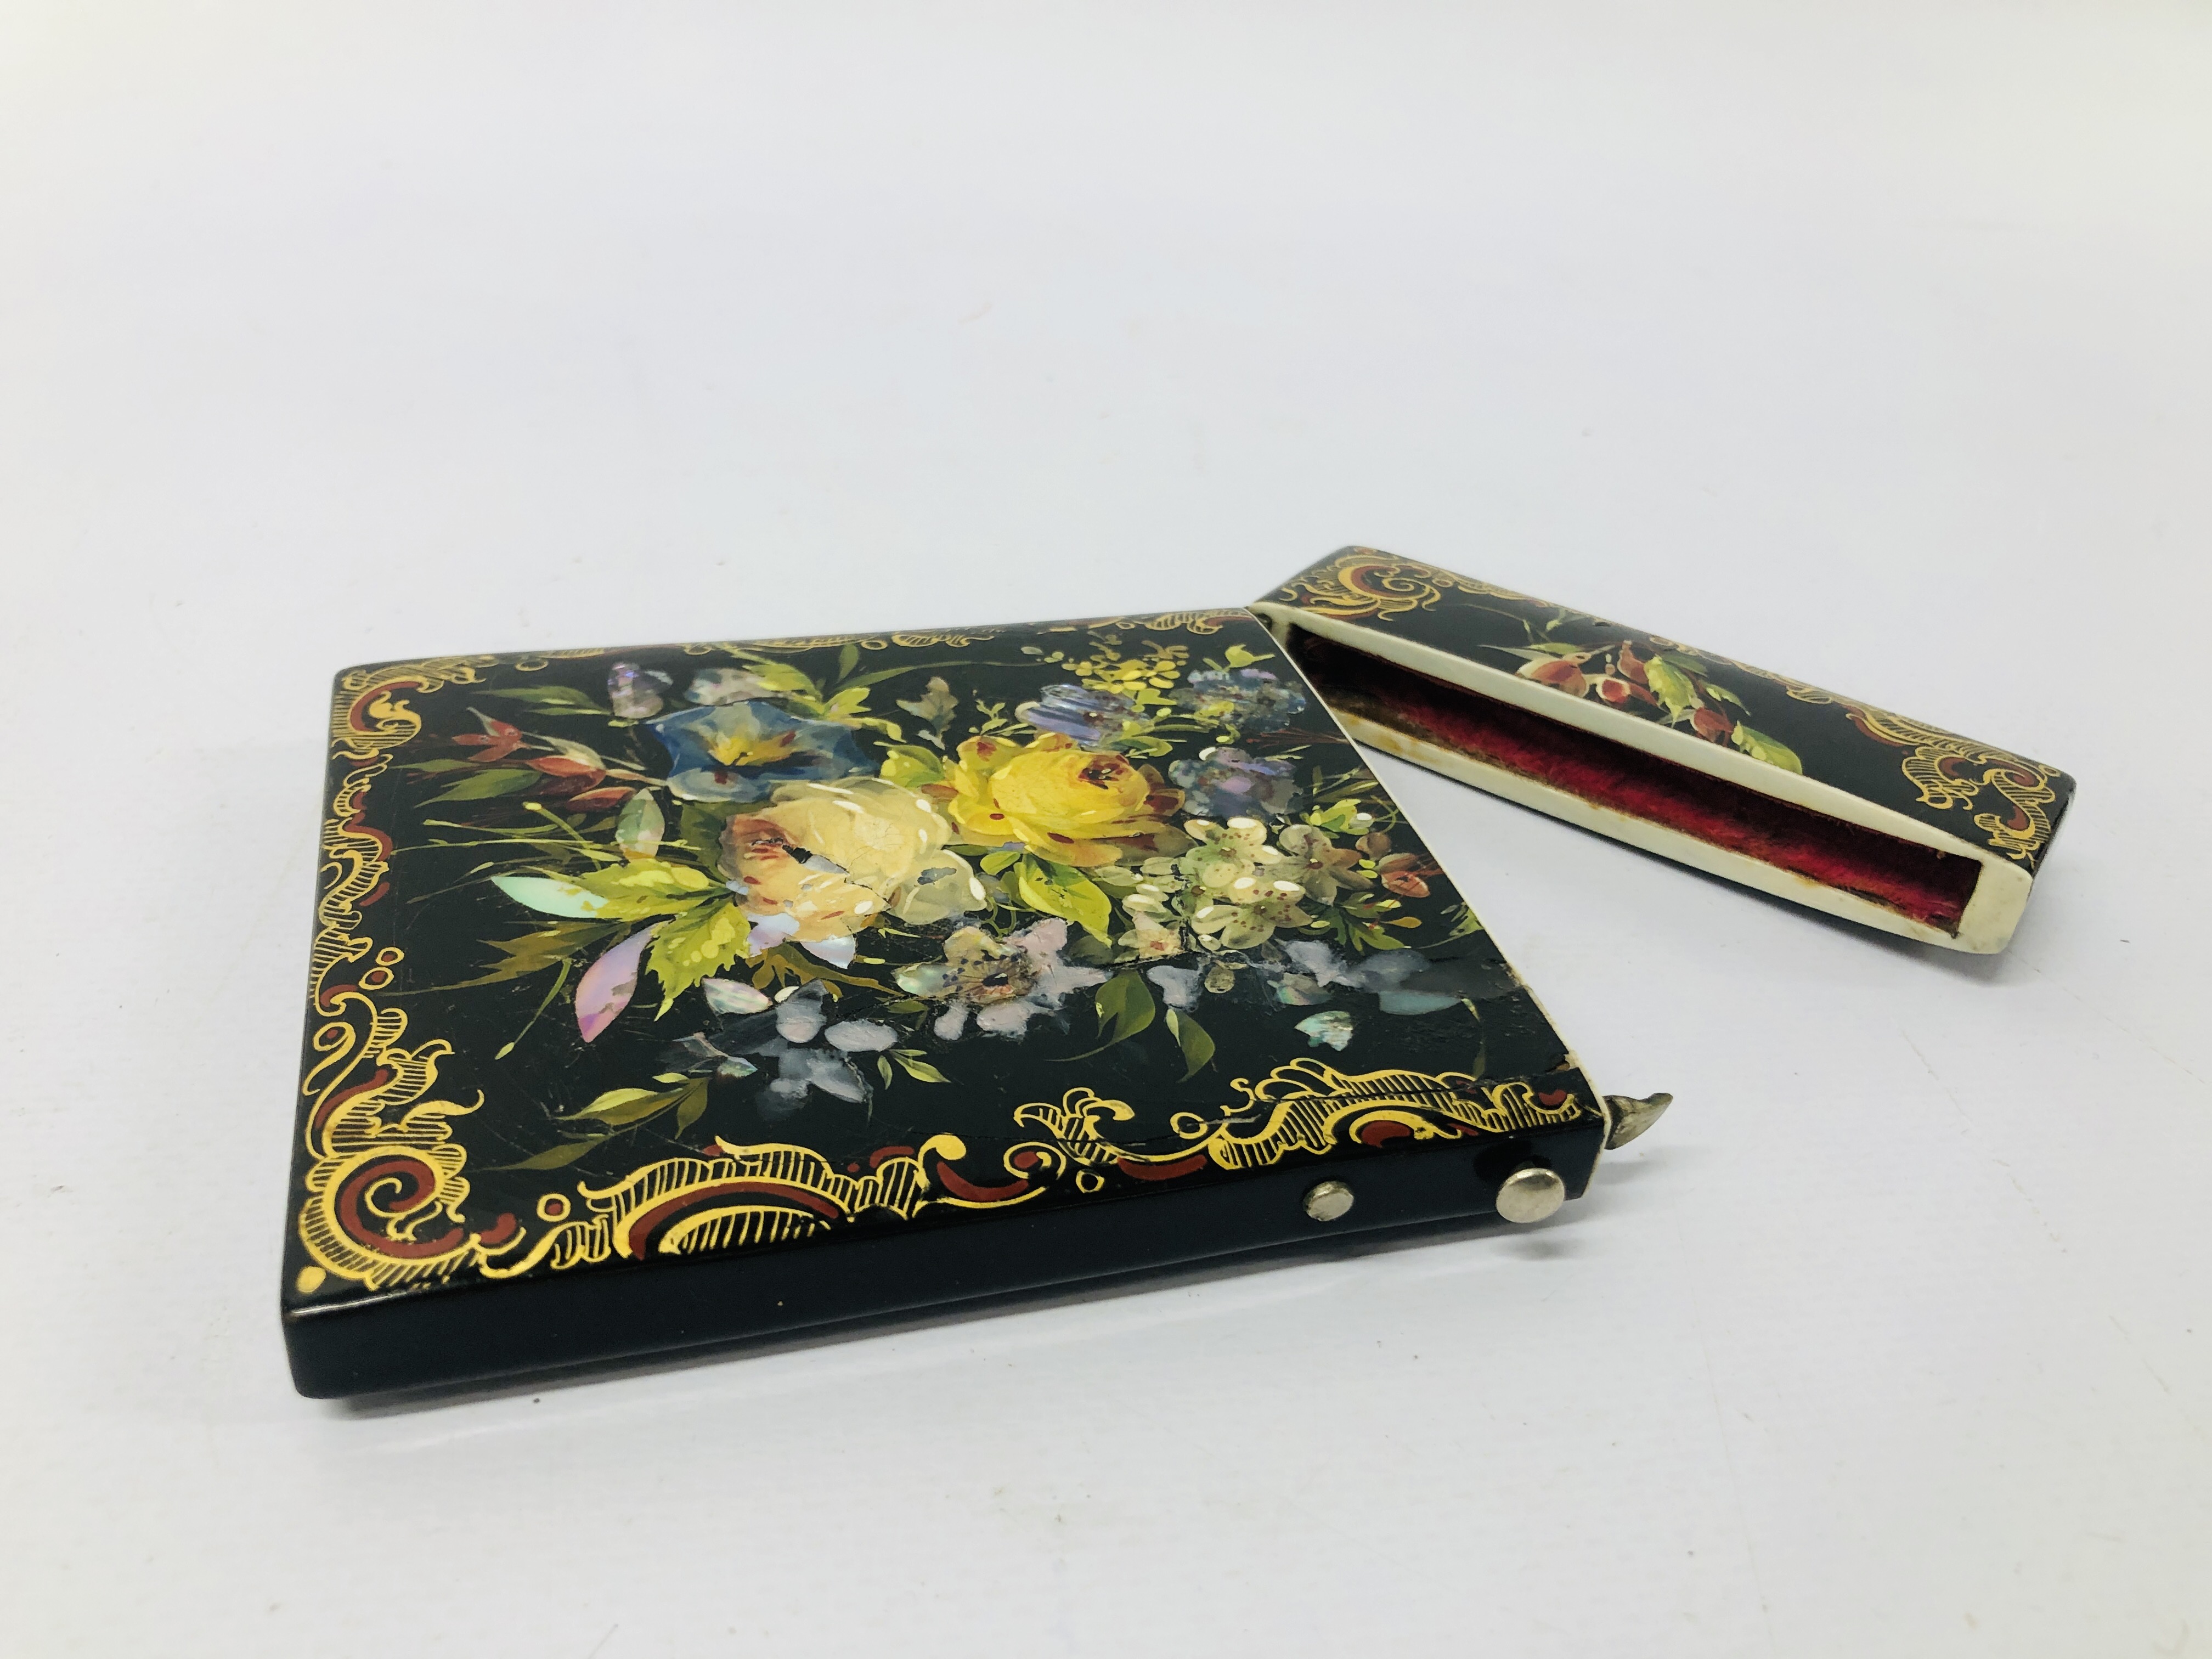 2 X VICTORIAN PAPIER MACHE CARD CASES BEAUTIFULLY DECORATED WITH HAND PAINTING MOTHER OF PEARL - Image 7 of 7